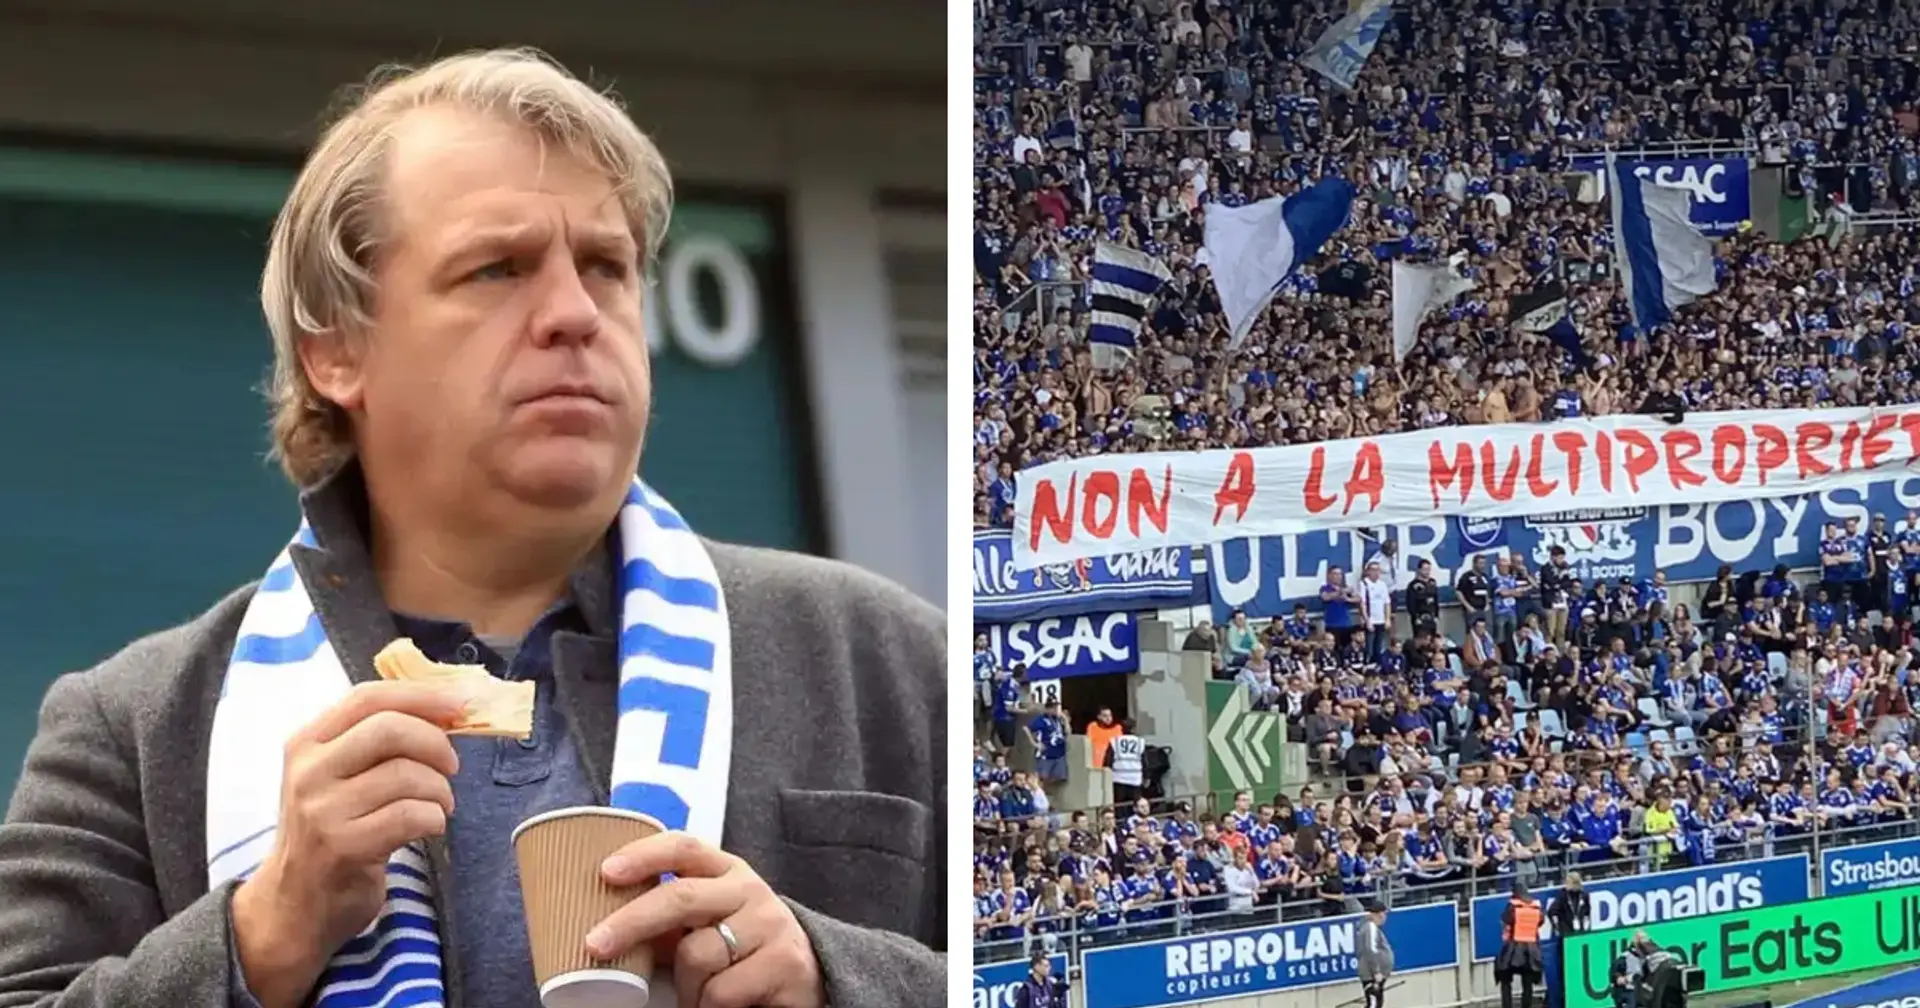 'We don’t want incompetence that reigns at Chelsea': Strasbourg fans send scathing letter to owners